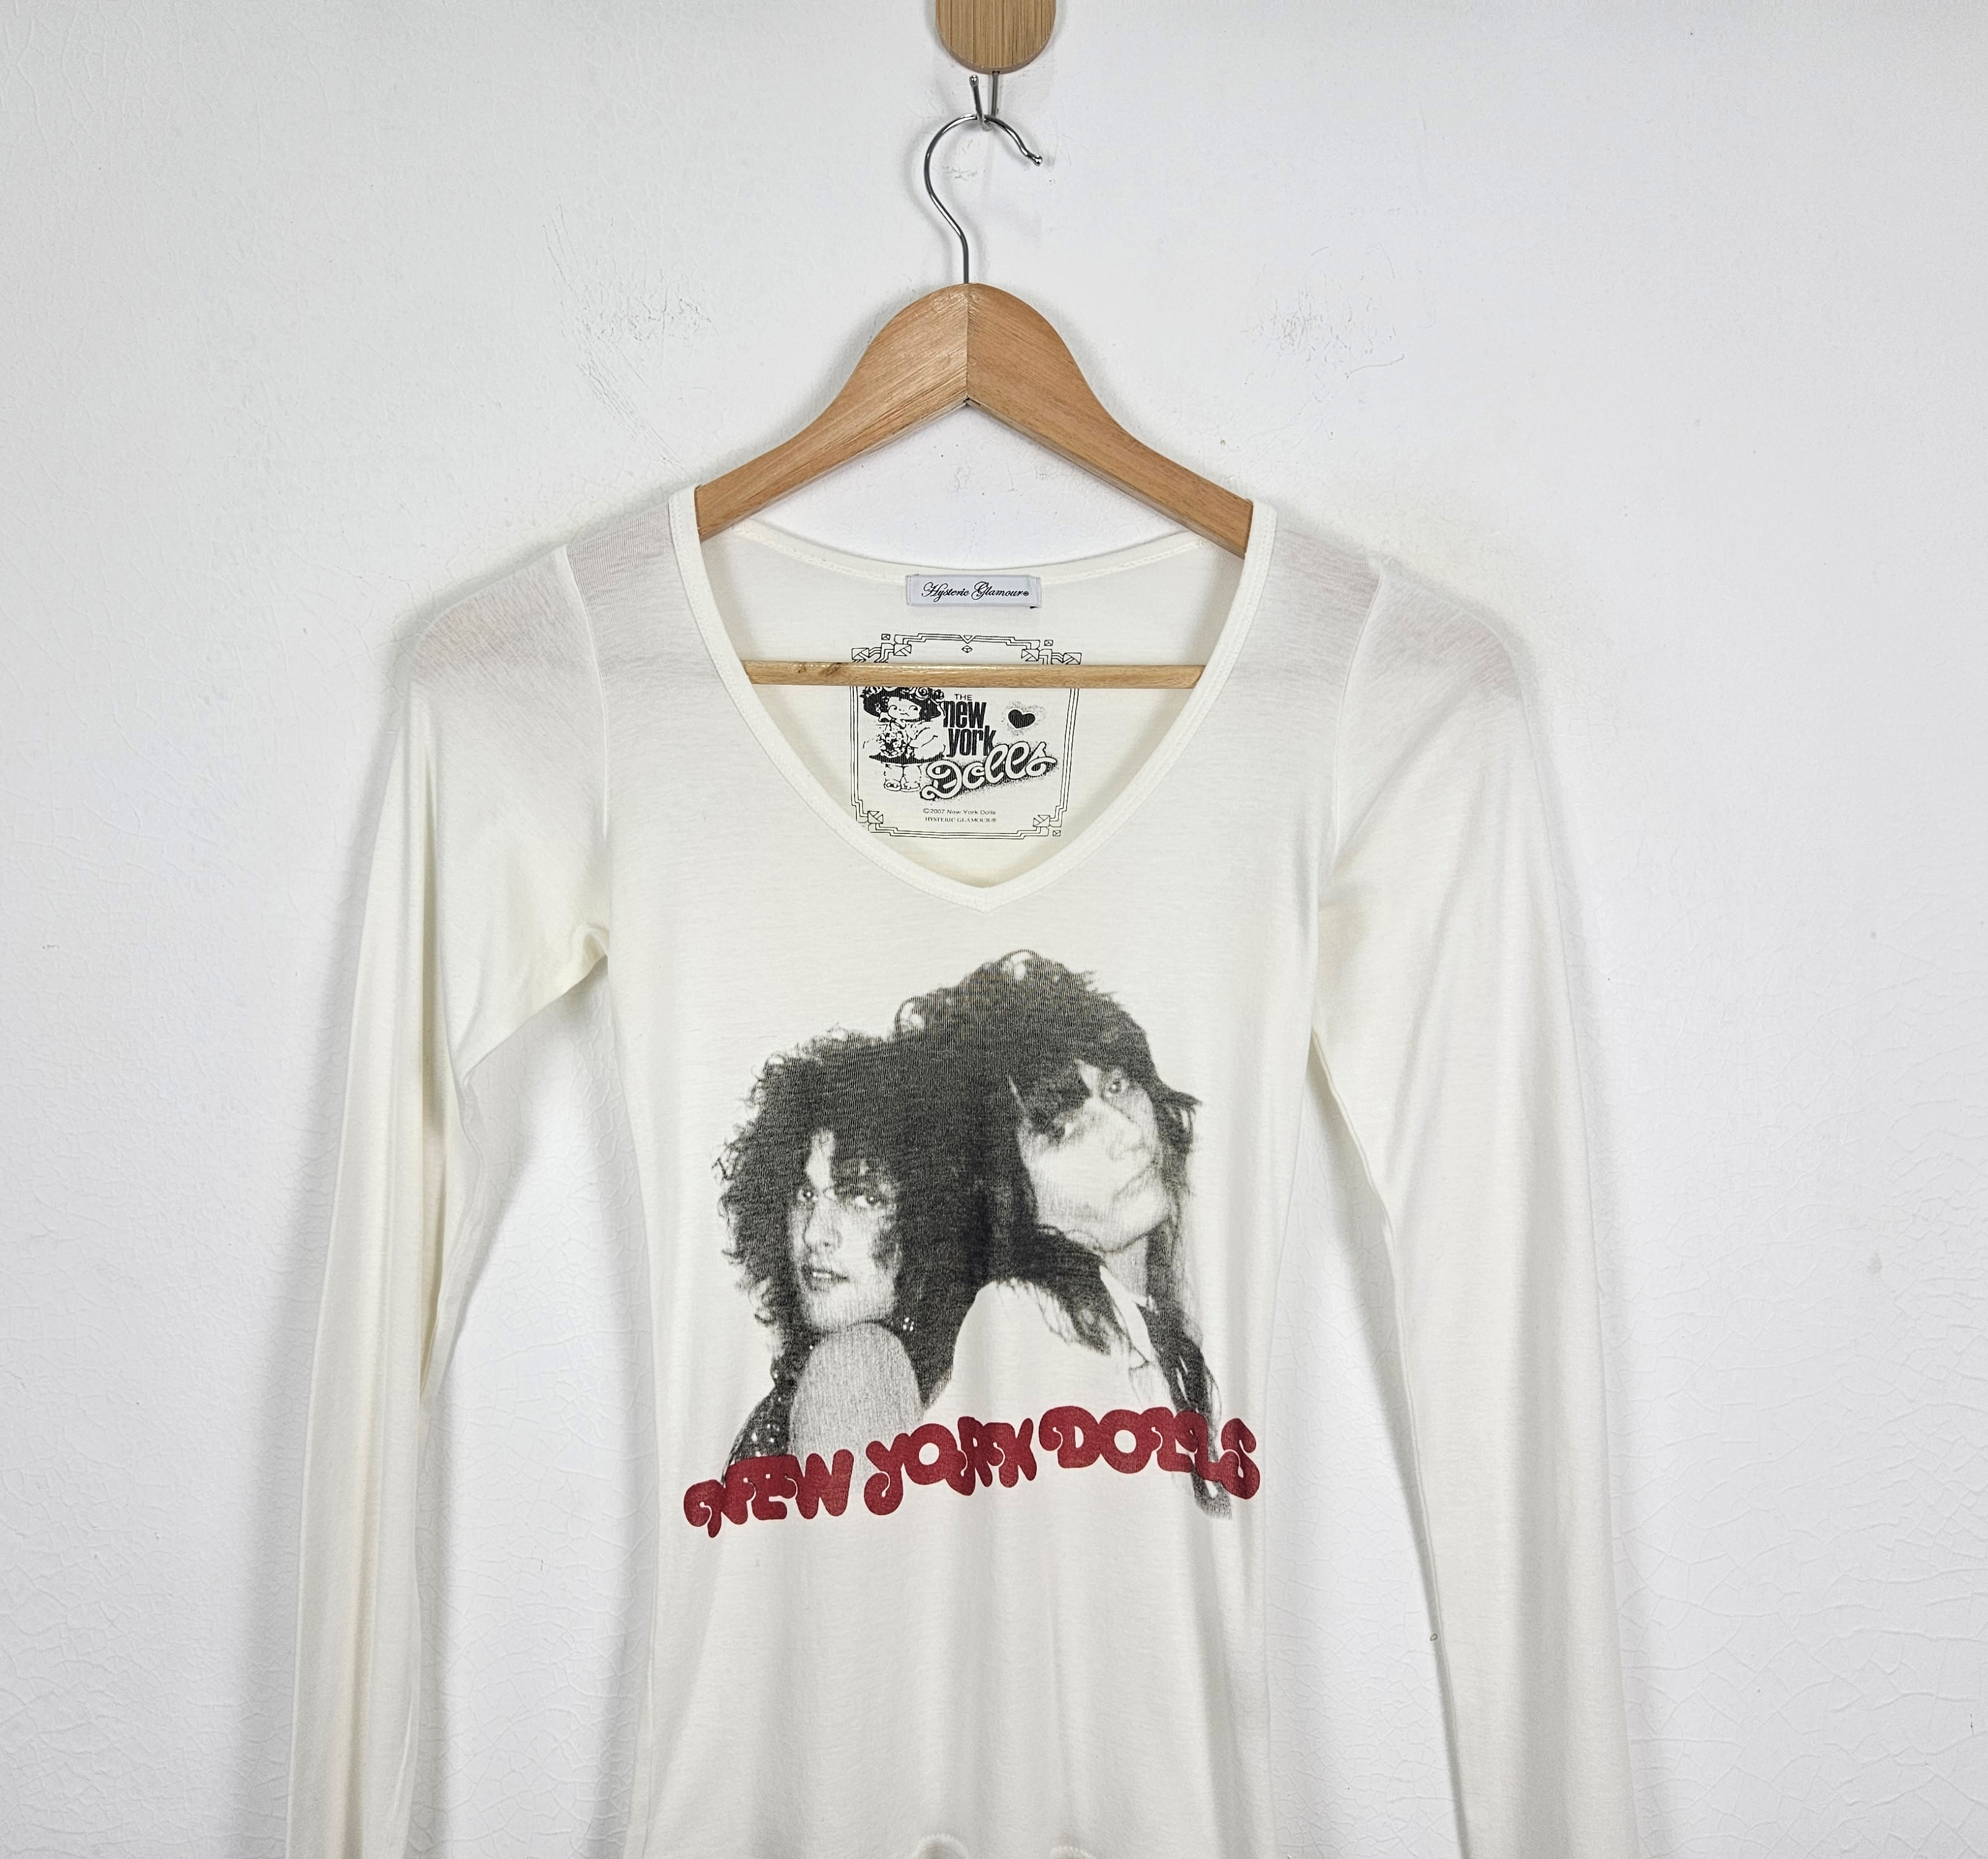 Hysteric Glamour - Hysteric Glamour New York Dolls shirt - 2